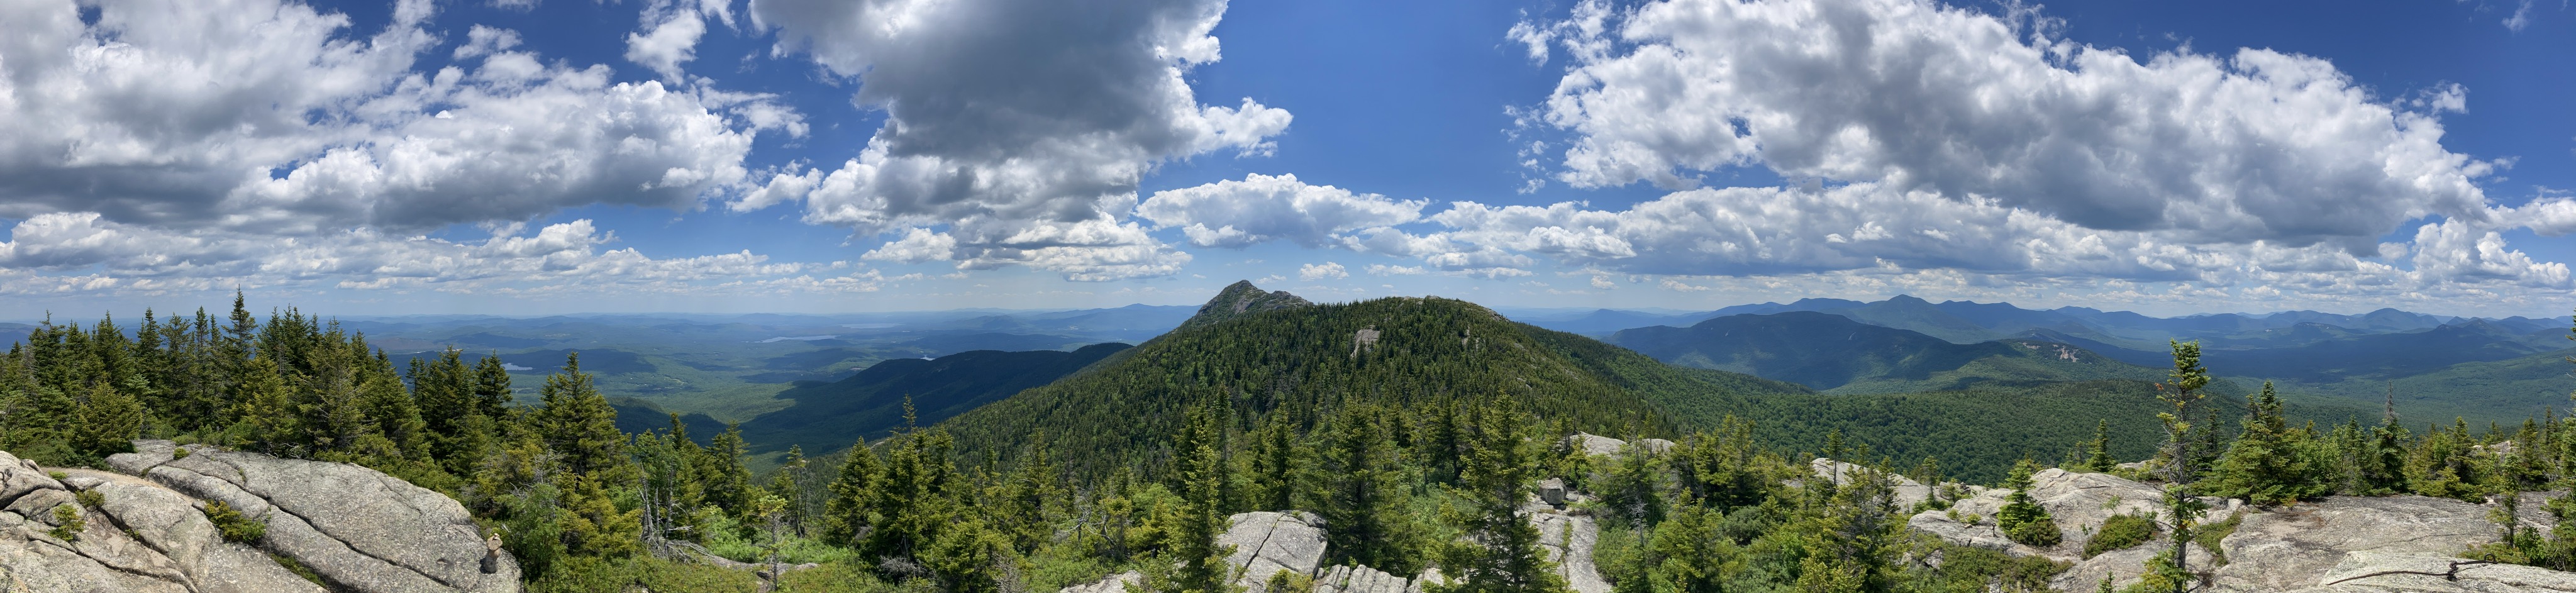 View from Middle Sister Summit on Mount Chocorua, White Mountain National Forest, NH